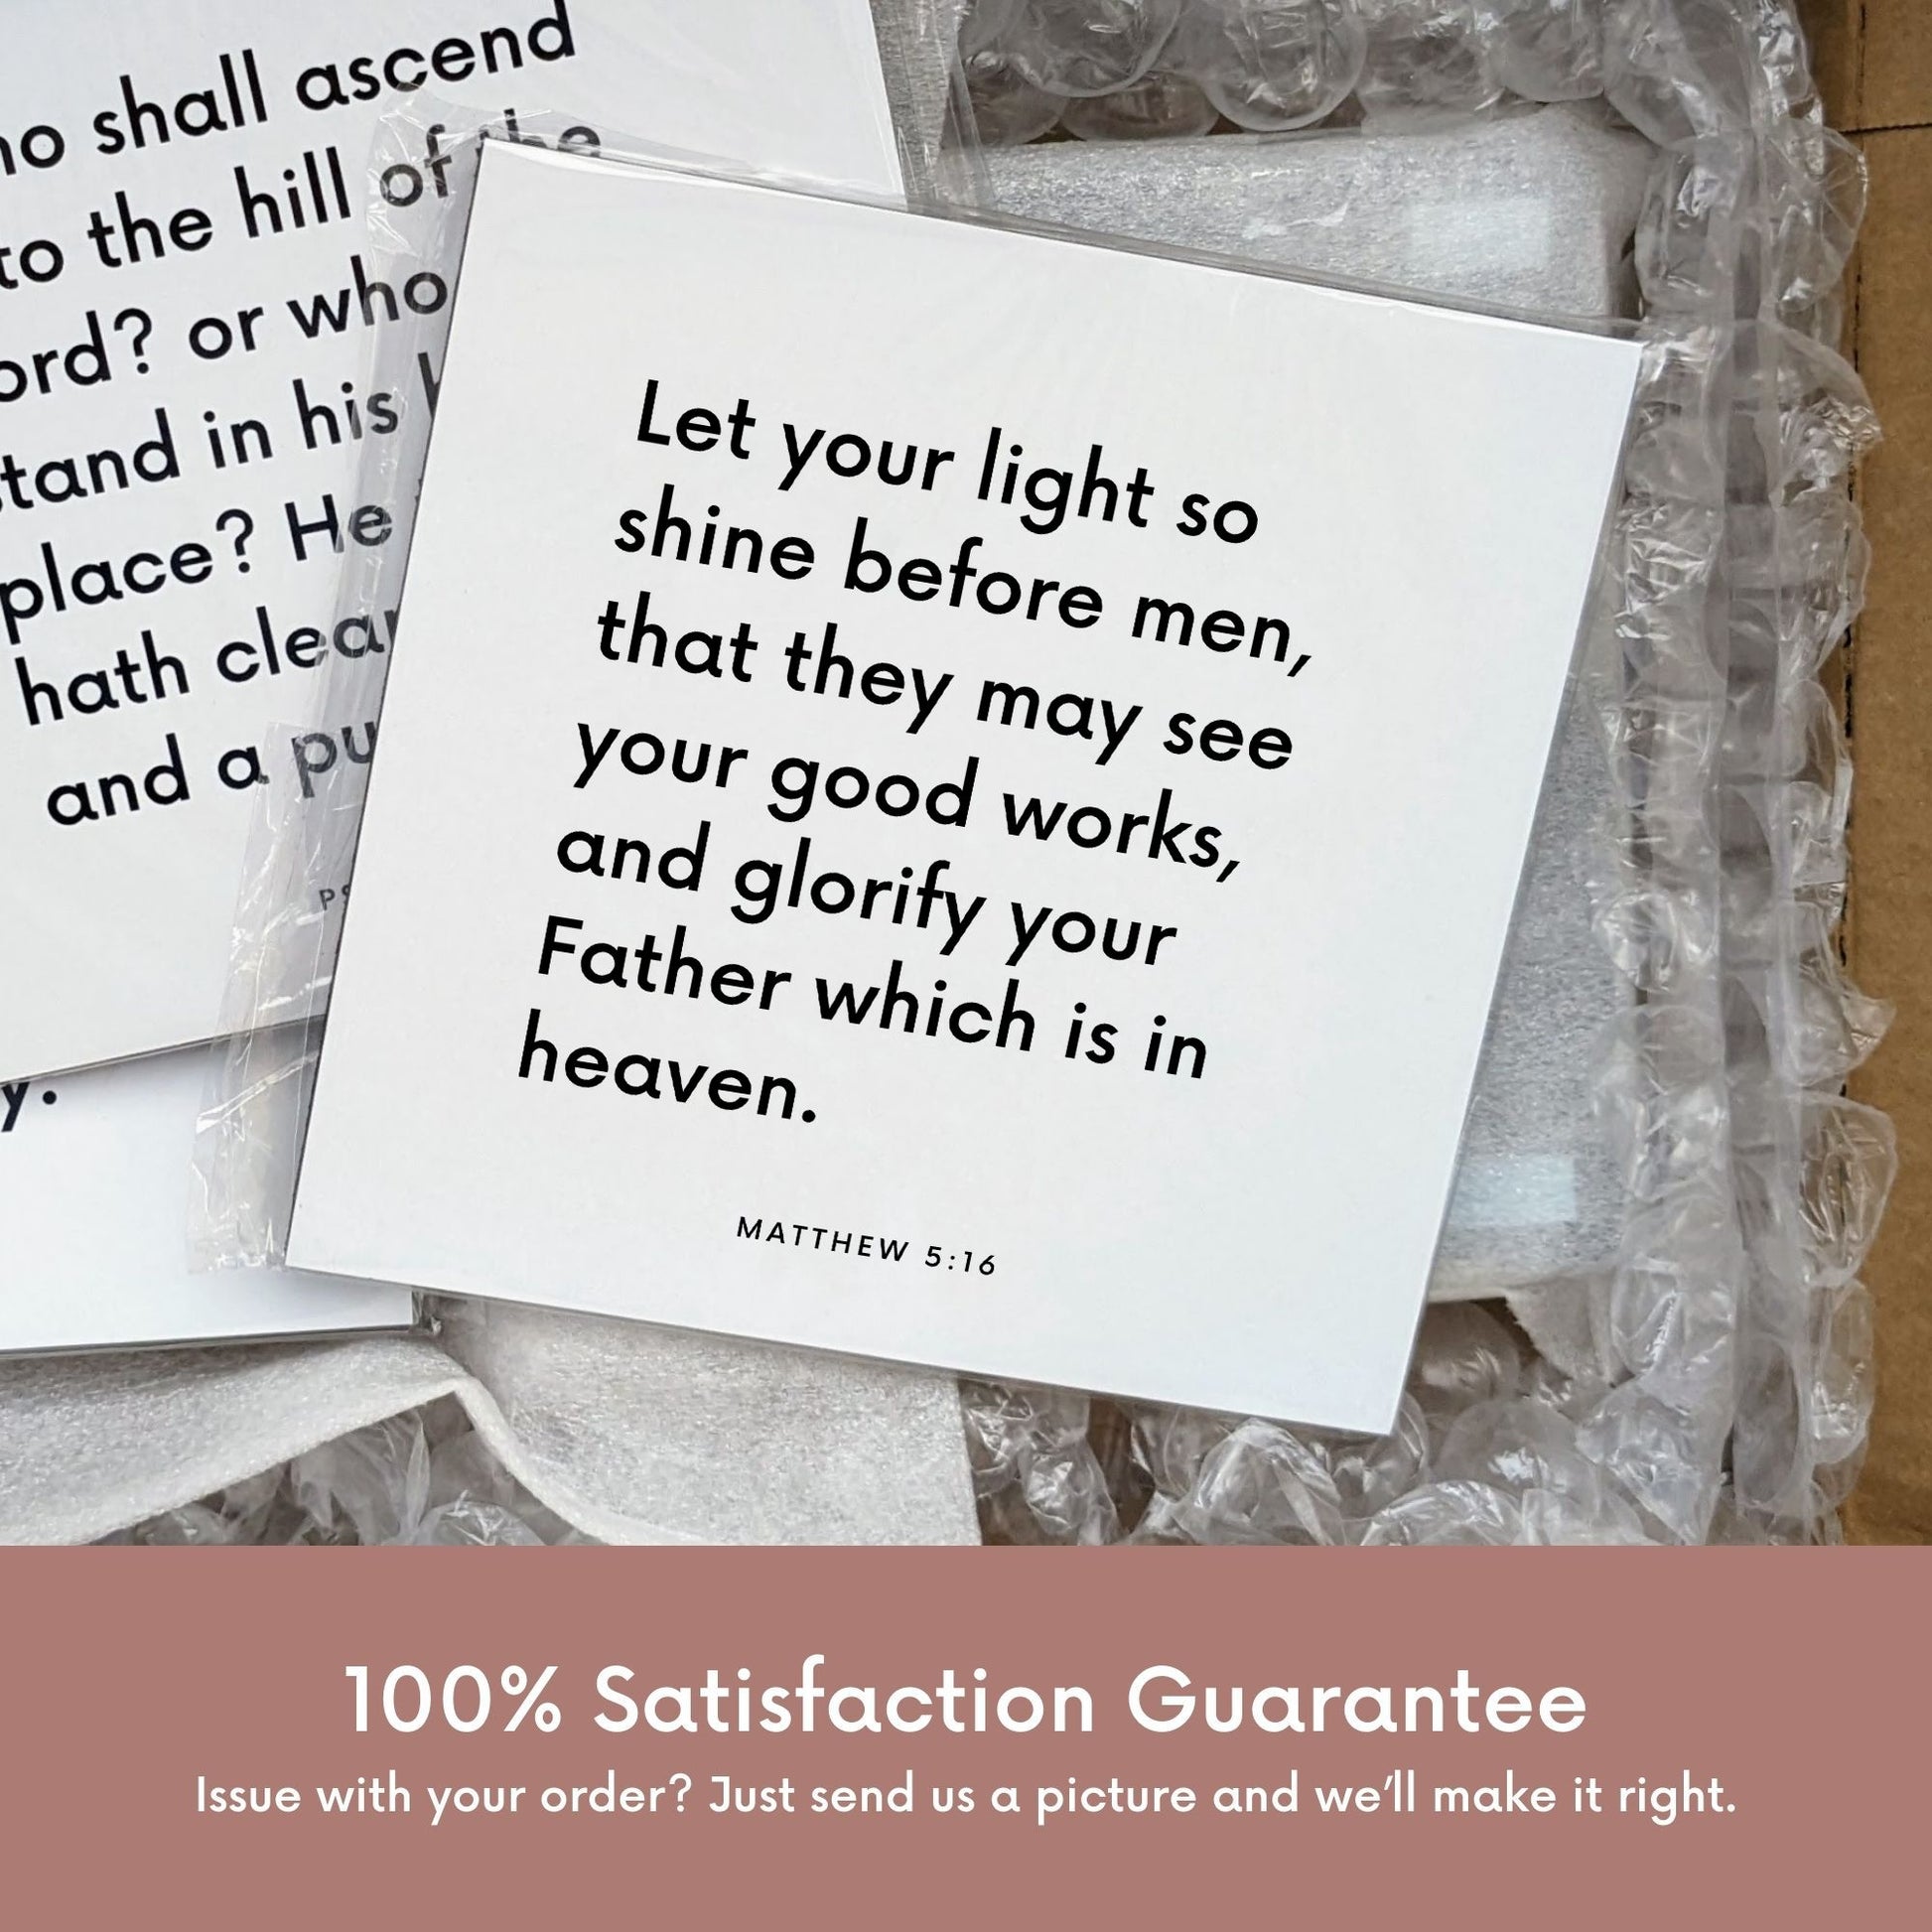 Shipping materials for scripture tile of Matthew 5:16 - "Let your light so shine before men"